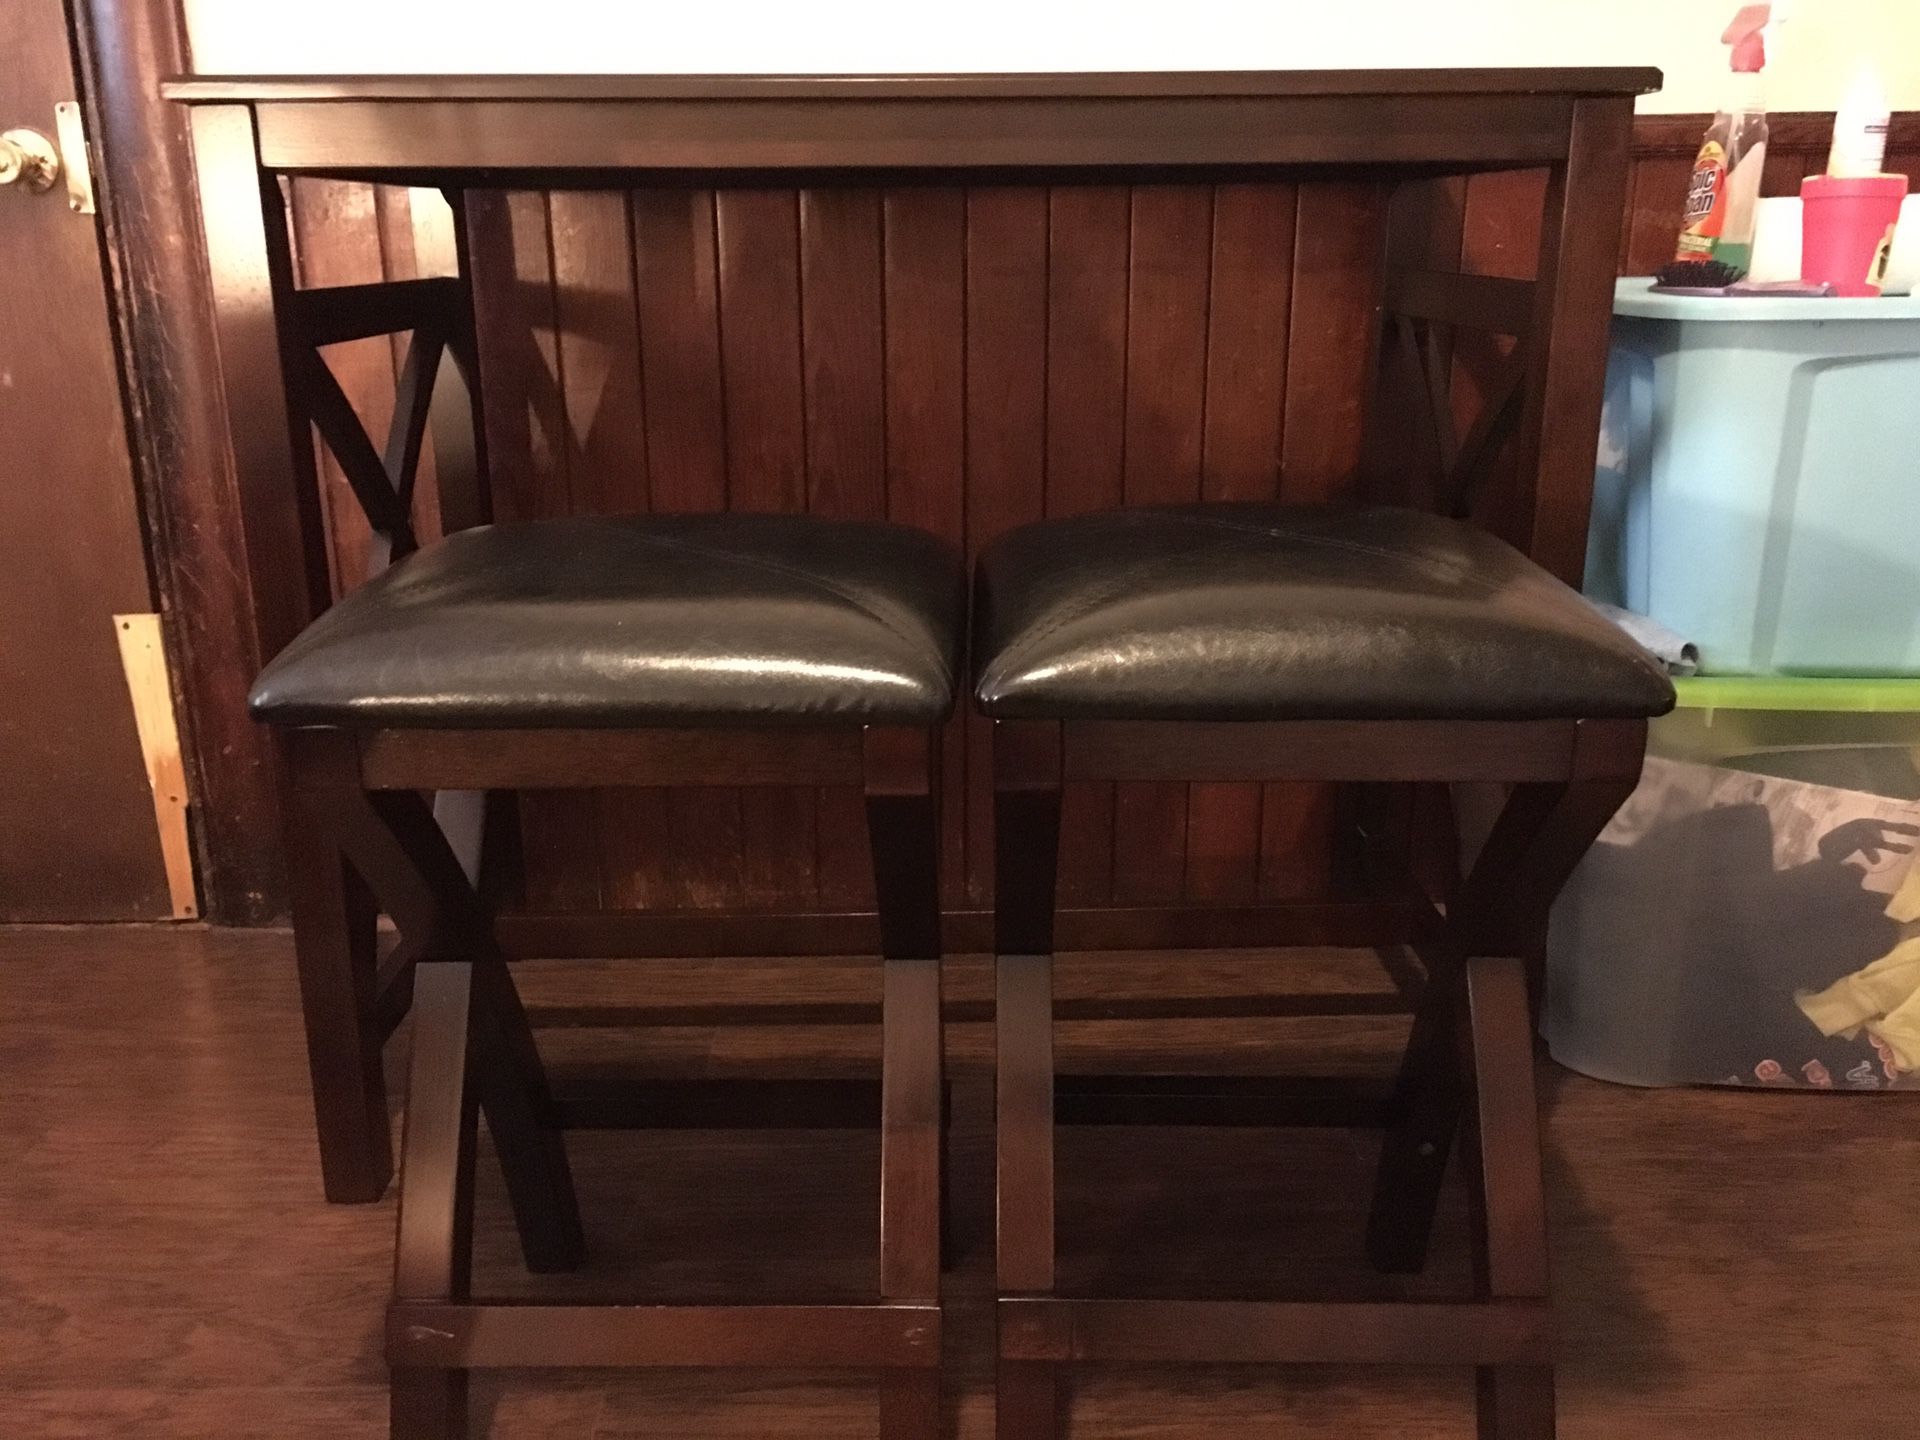 Small kitchen table with 2 stools